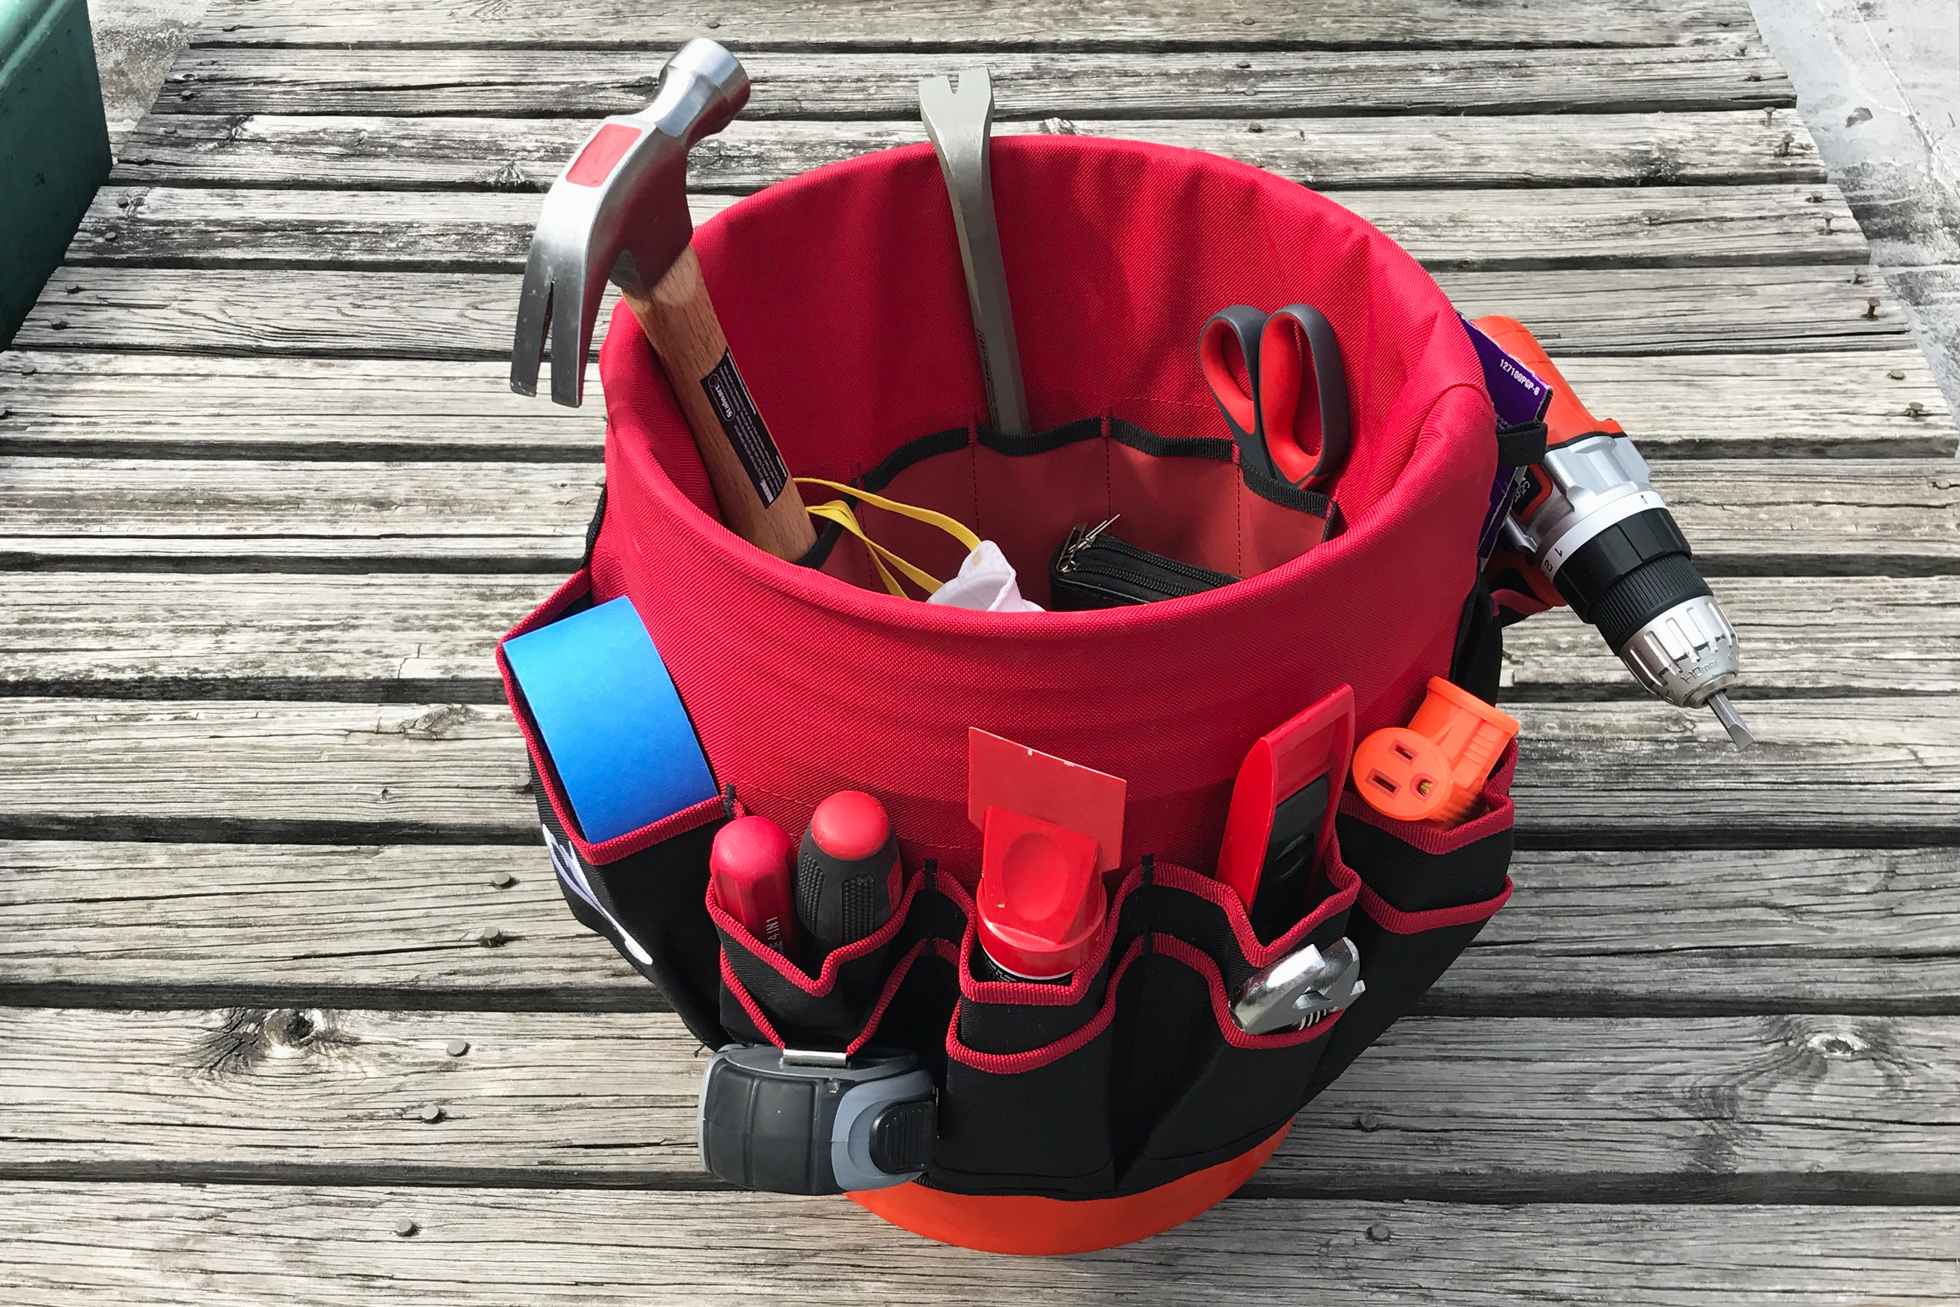 A red tool bucket liner in a bucket filled with hardware